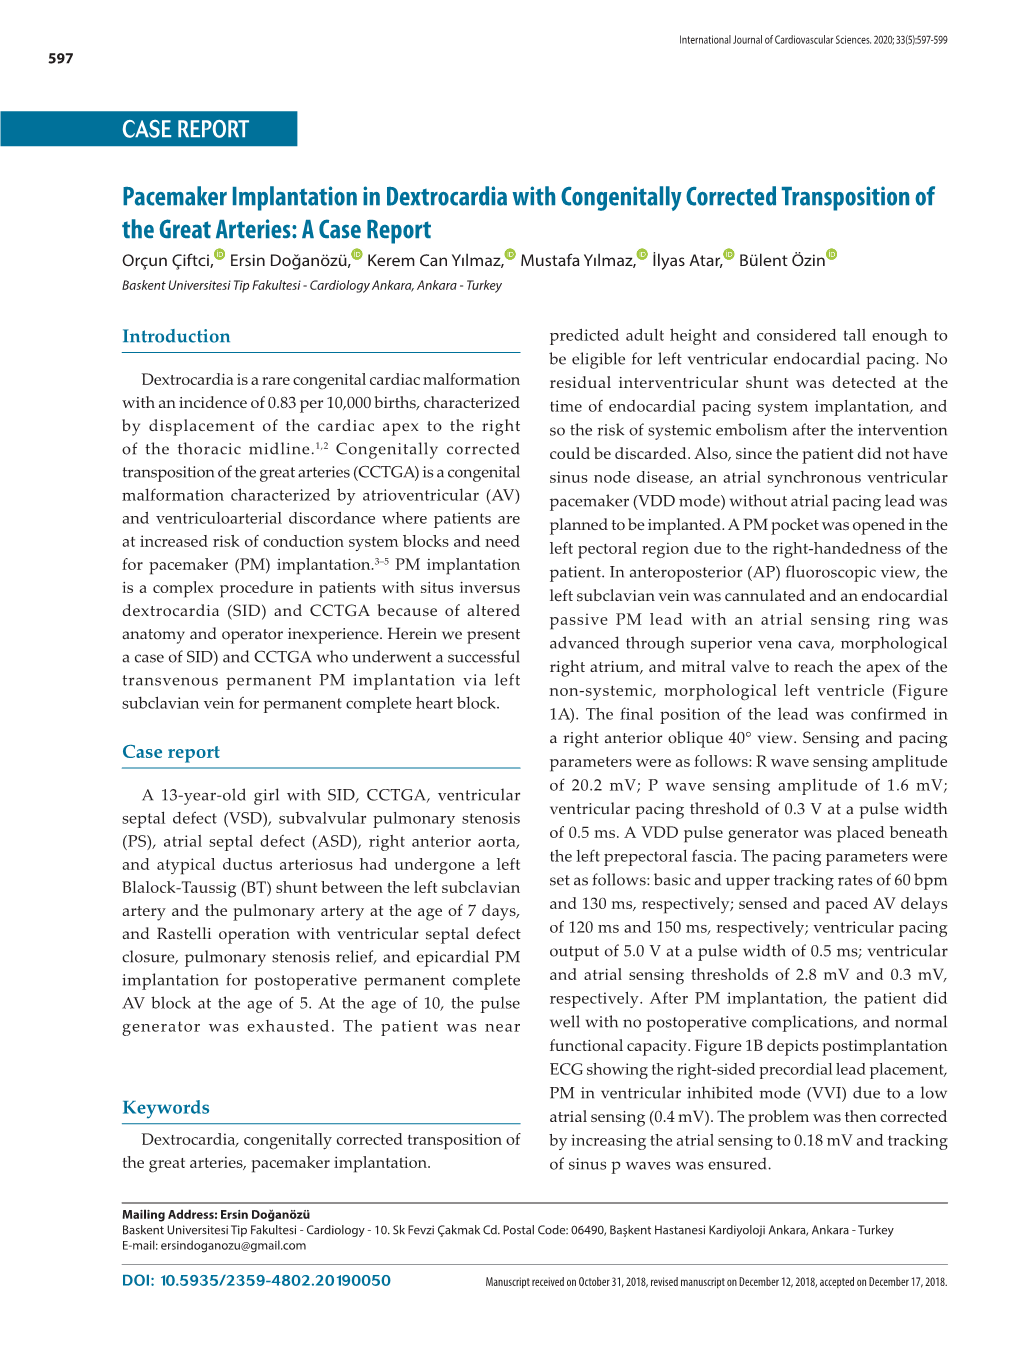 Pacemaker Implantation in Dextrocardia with Congenitally